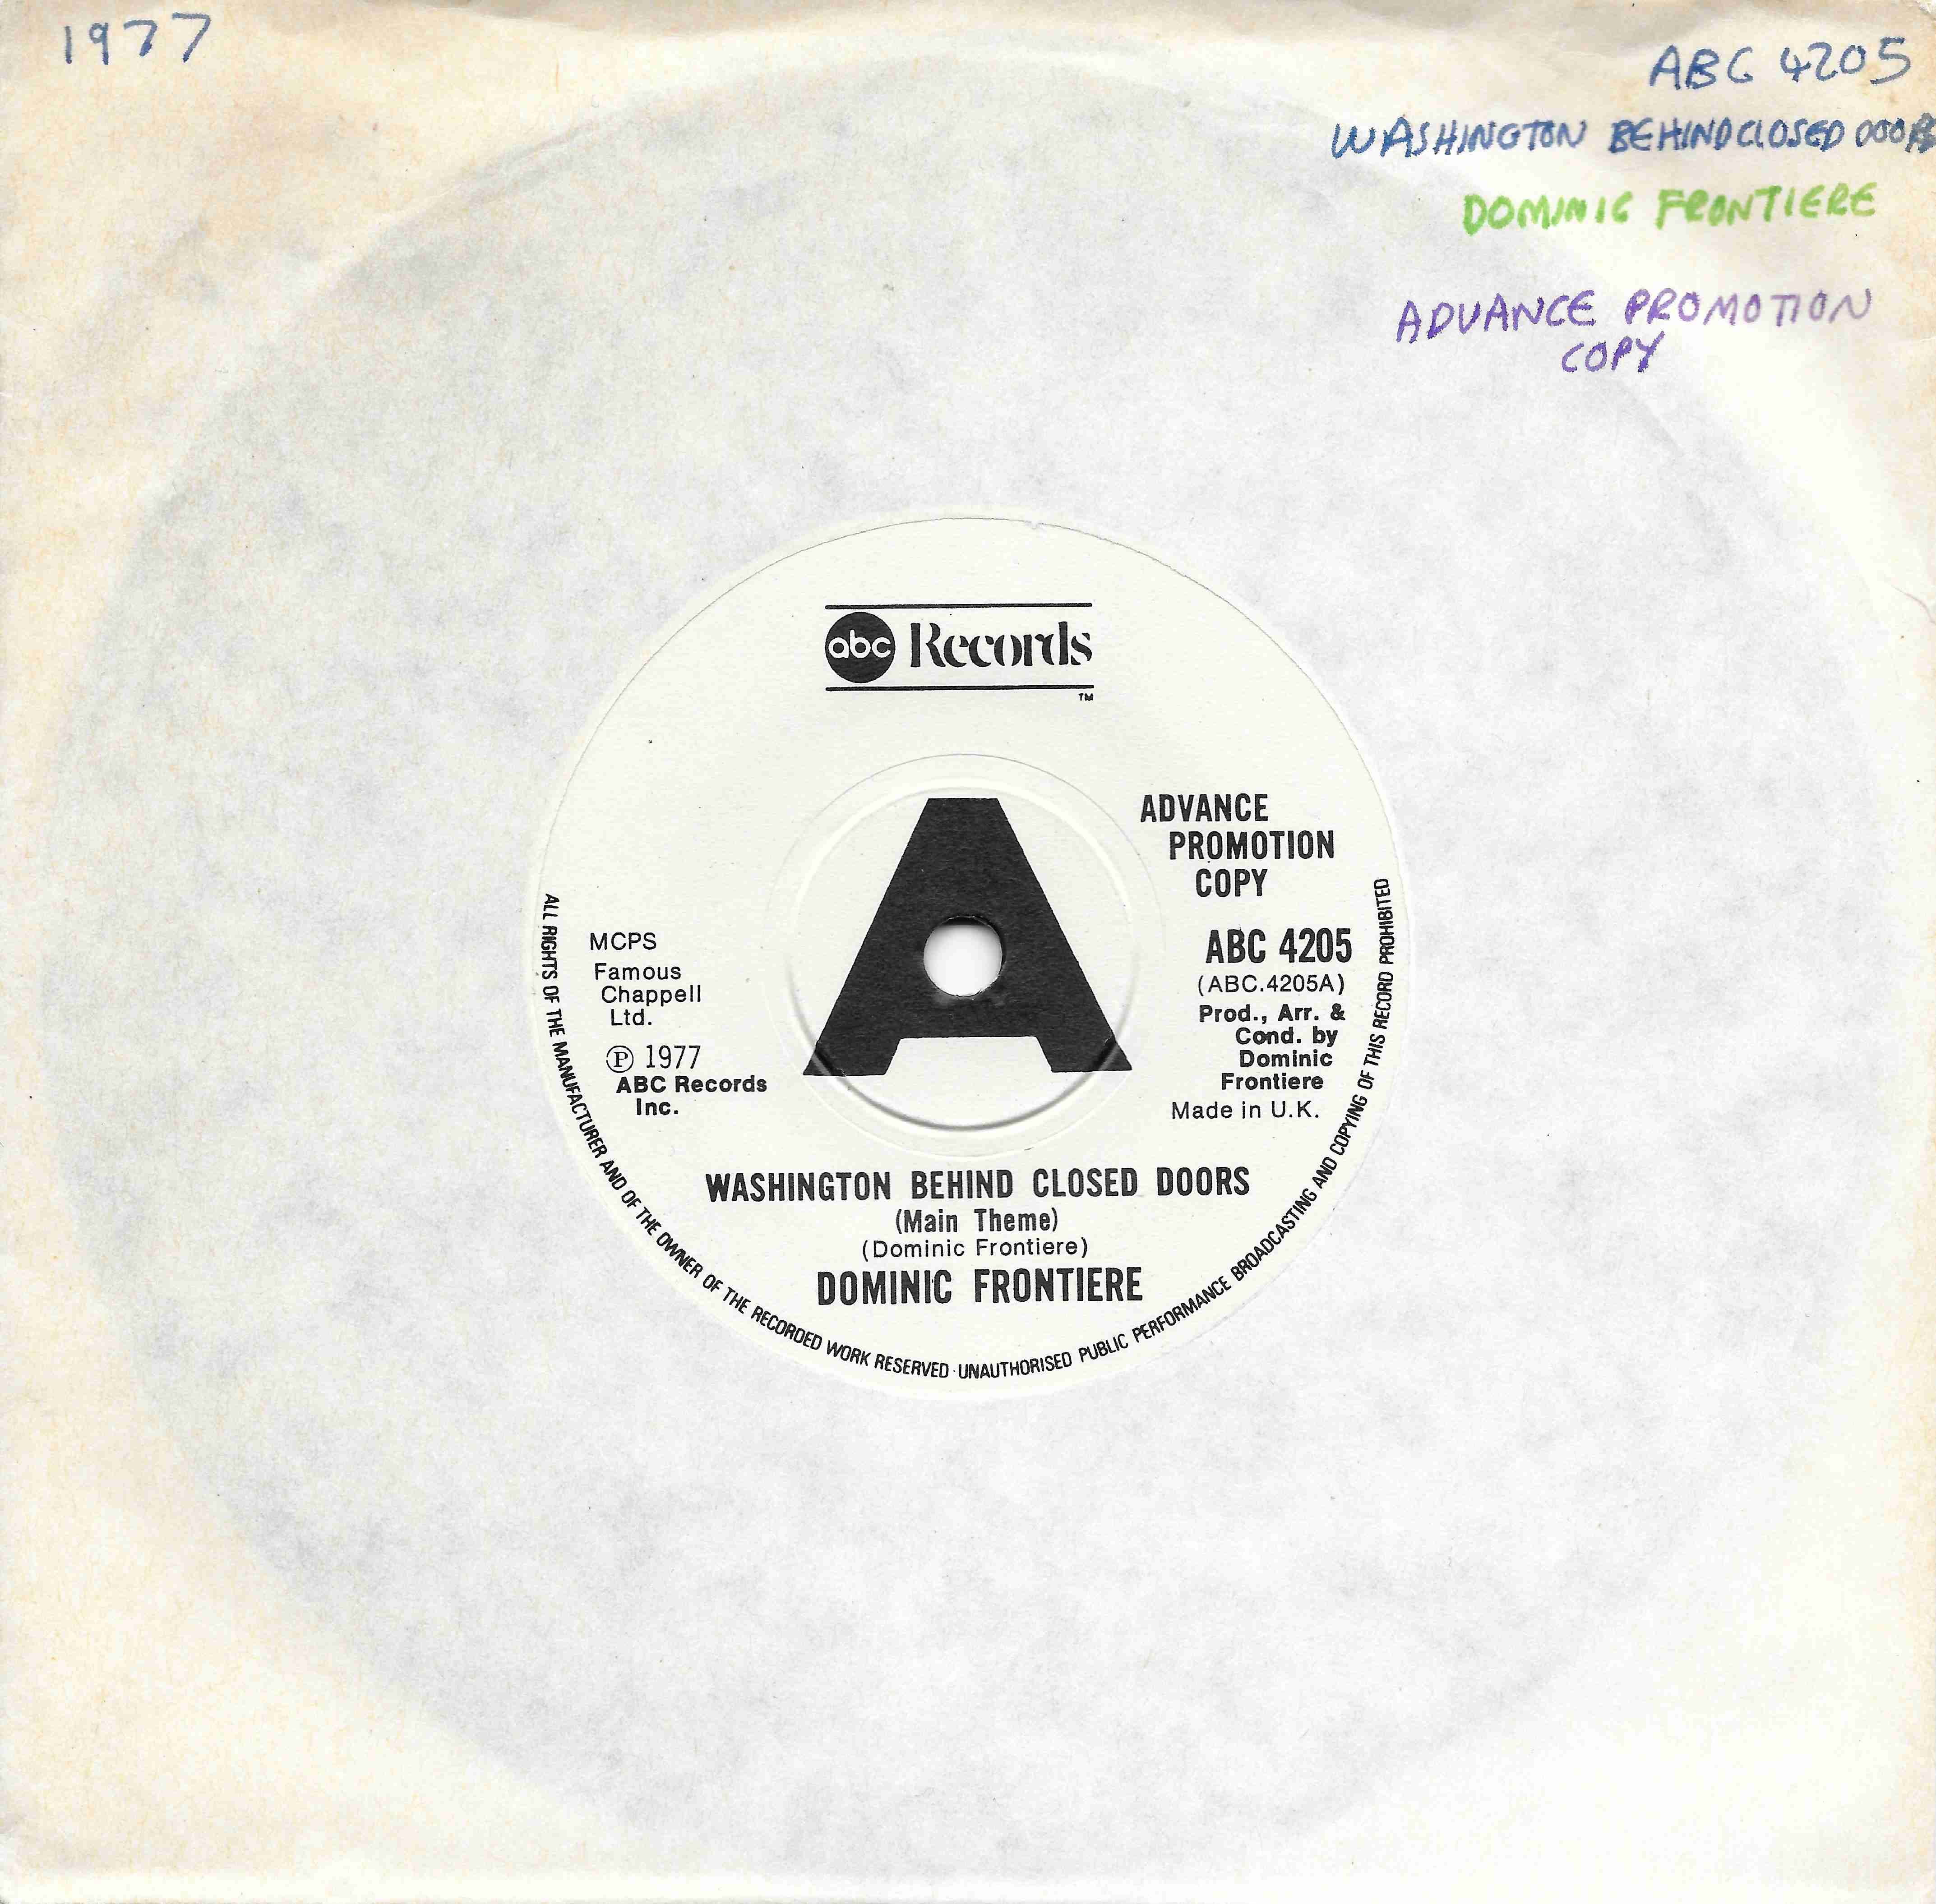 Picture of ABC 4205 P Washington behind closed doors - Promotional record by artist Dominic Frontiere from the BBC singles - Records and Tapes library